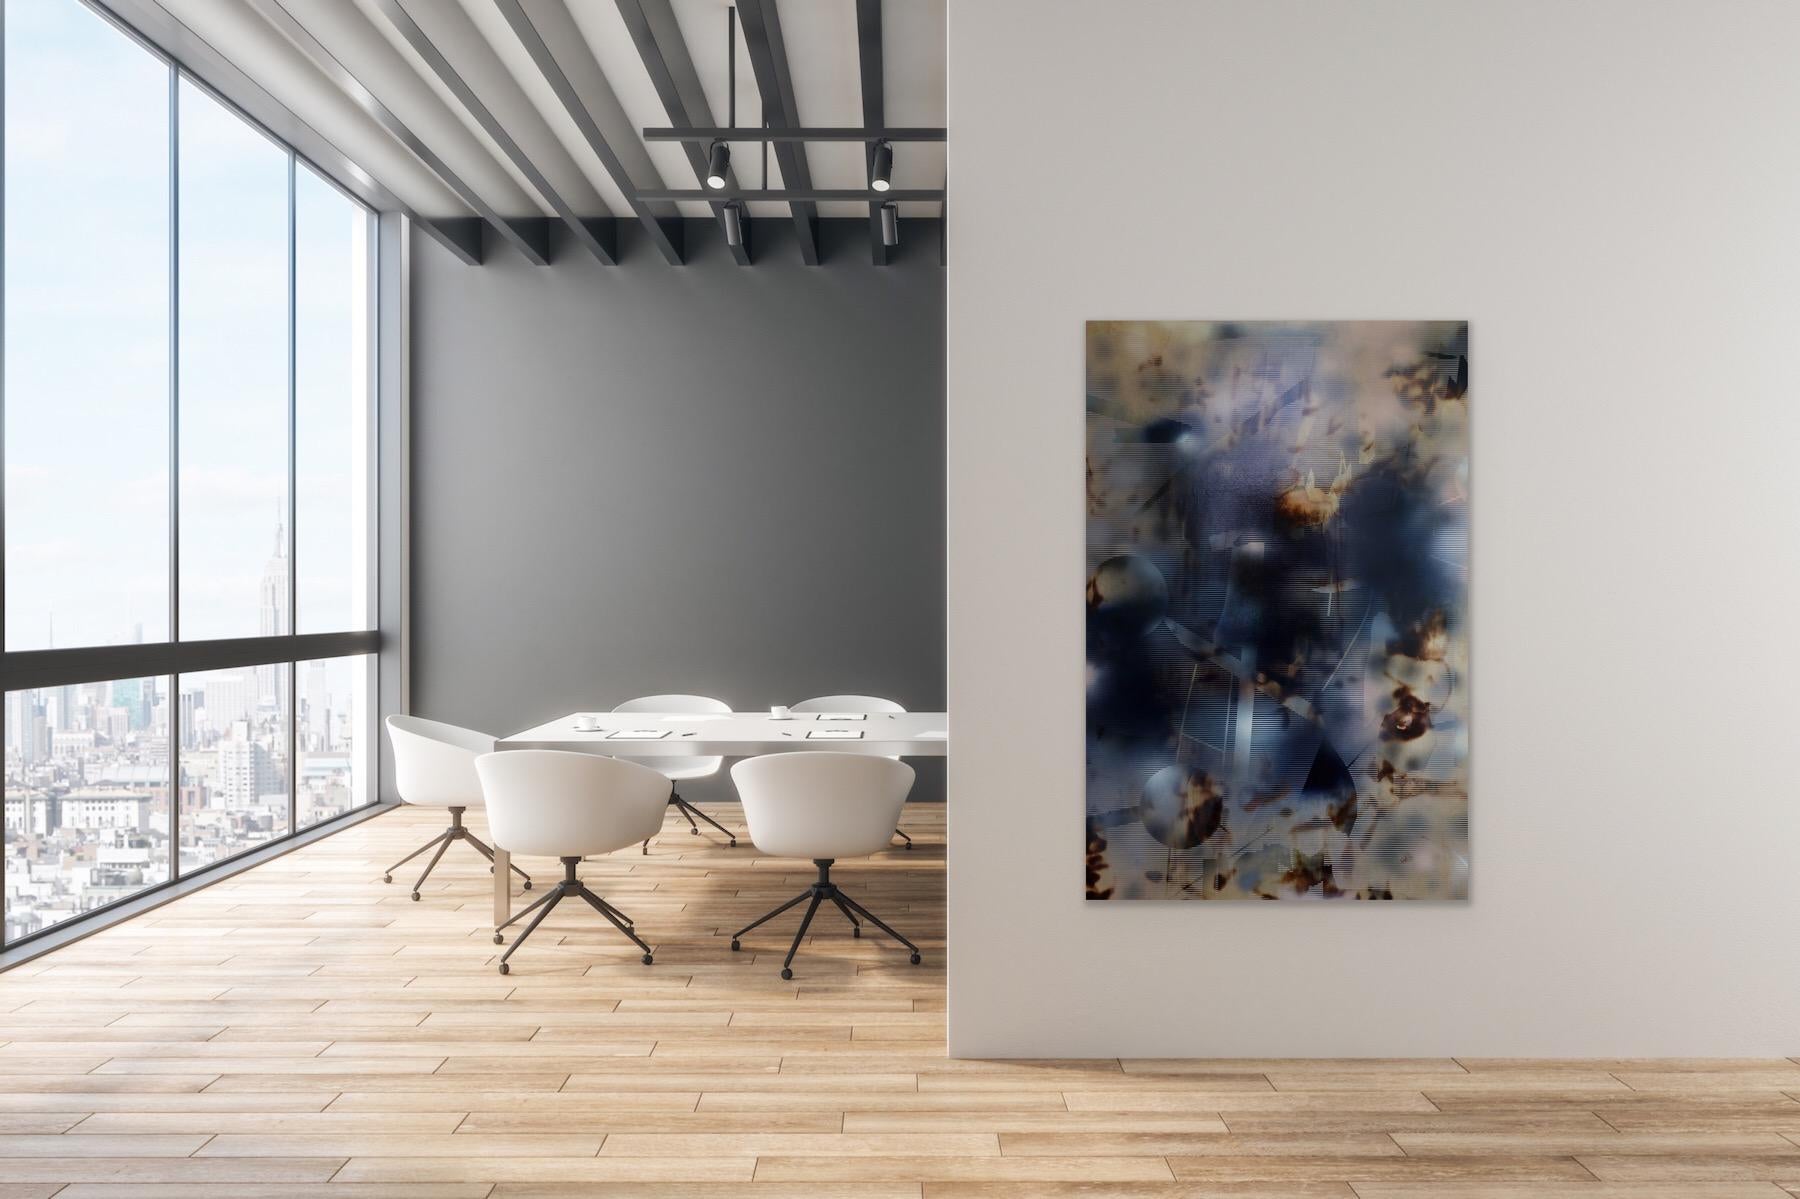 In Melisa’s optical and pulsating compositions, the natural world acts as blue-print while she explores the notion of the sublime through blur and precision. The artist develops an aesthetic of duality by hybridizing divergent approaches to art. Her